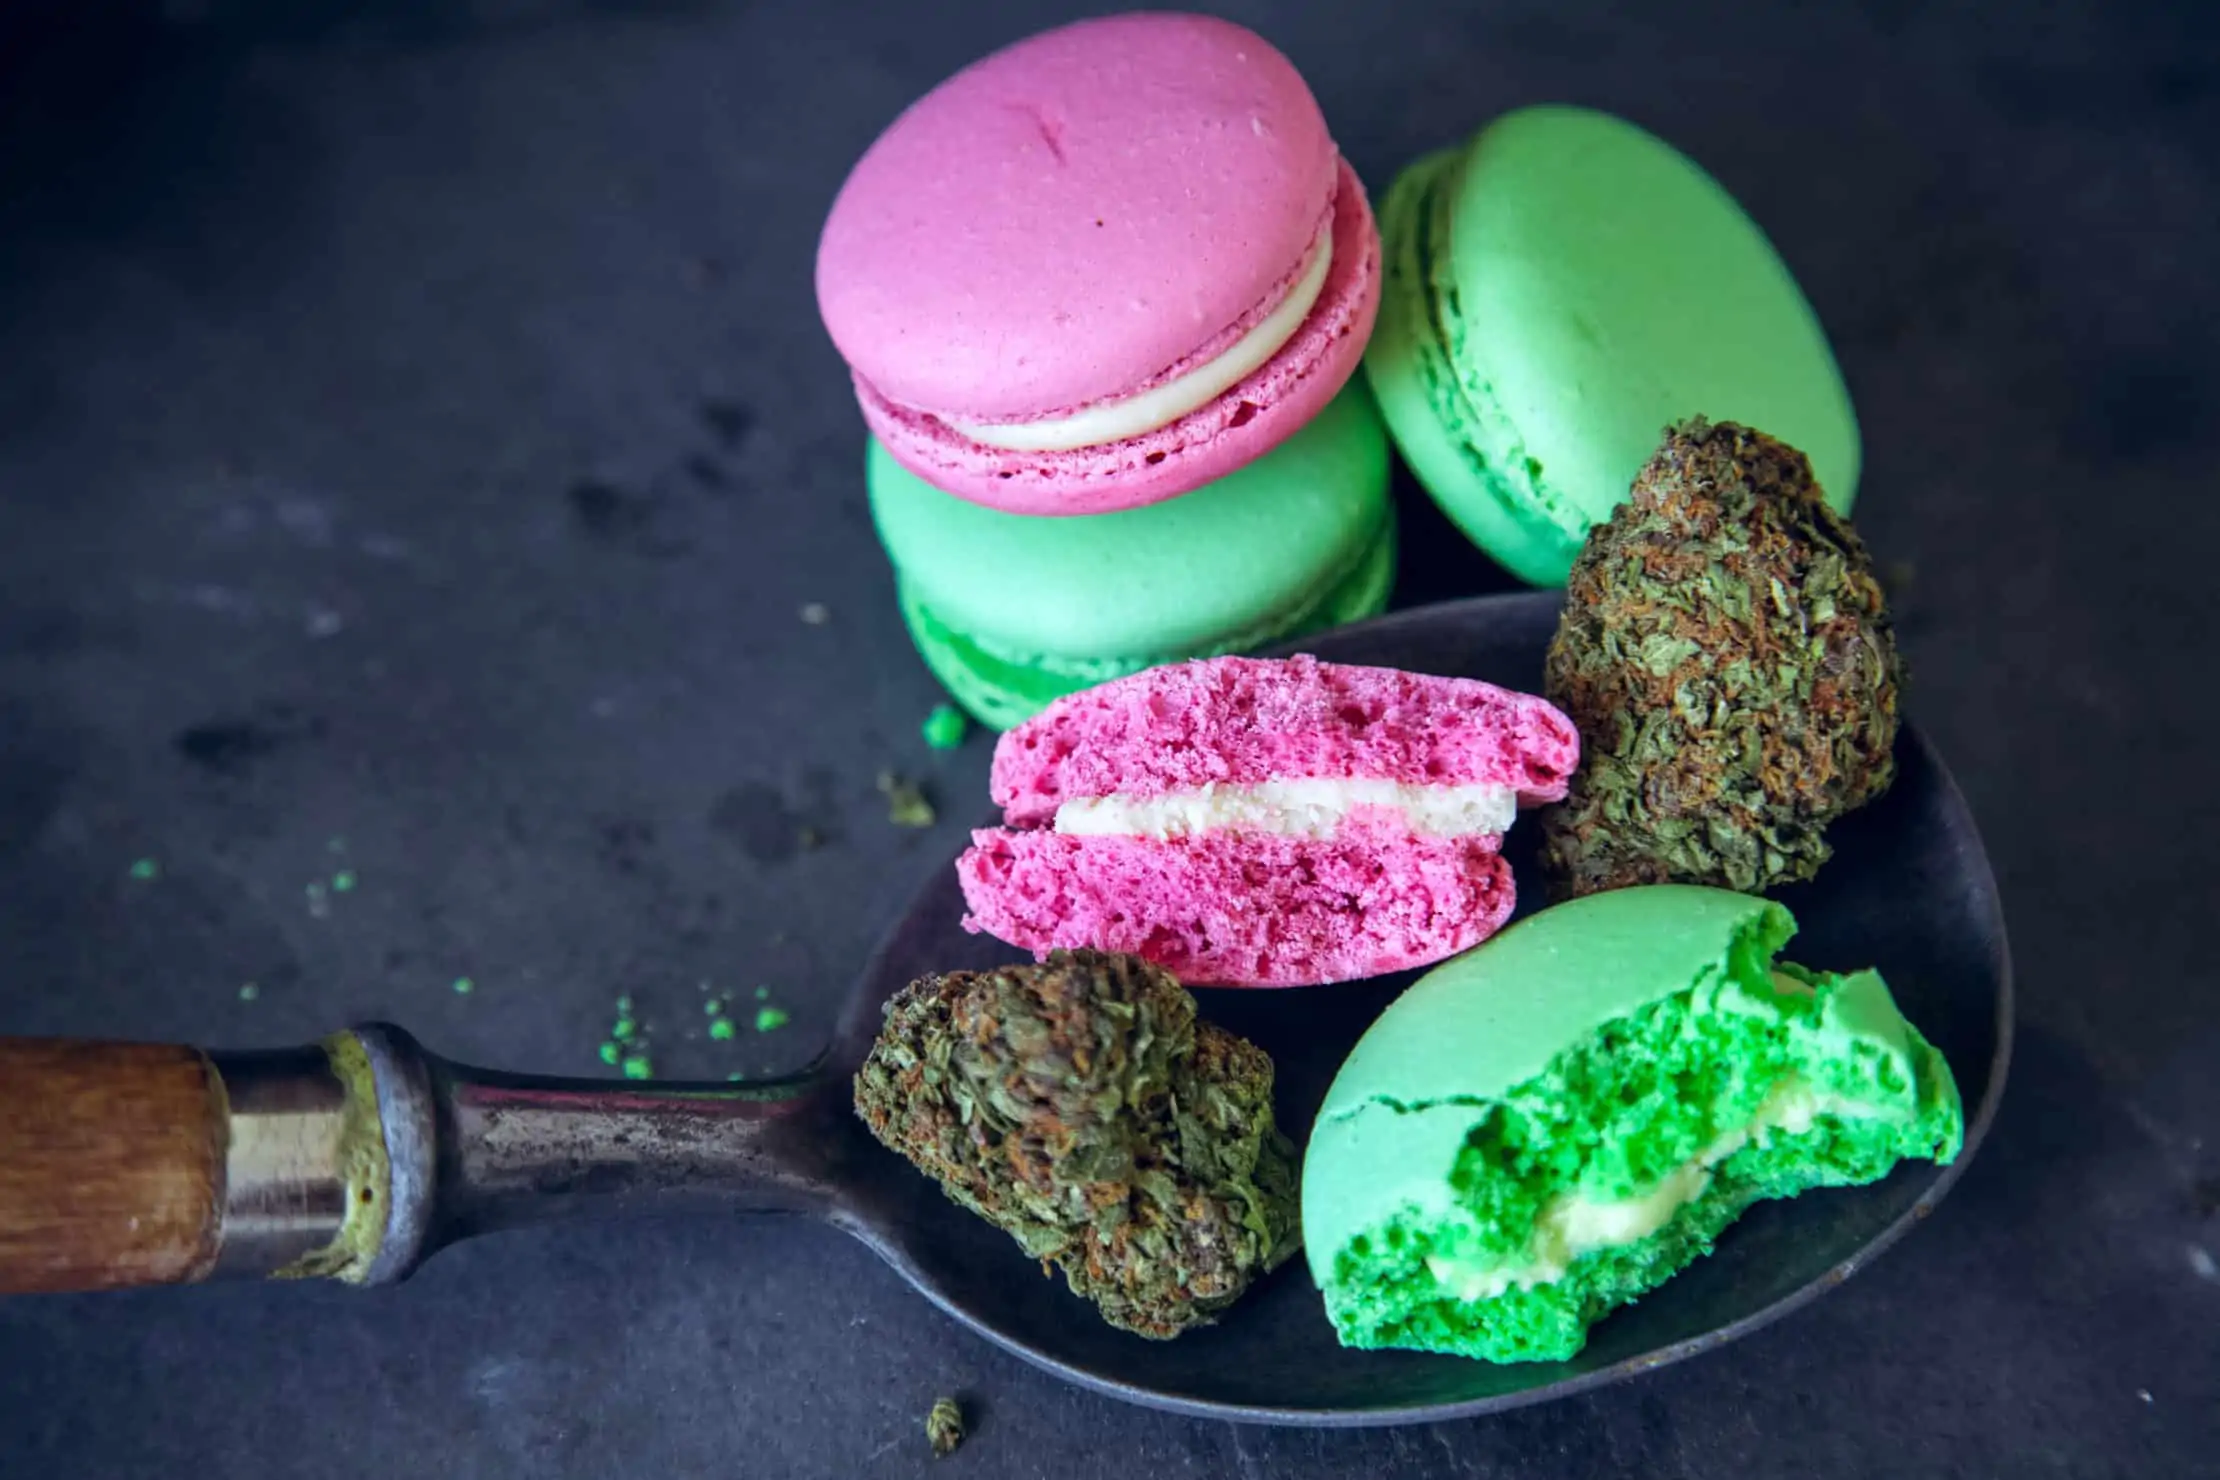 What Are The Side Effects of Edibles? Weed and edibles on a spoon.